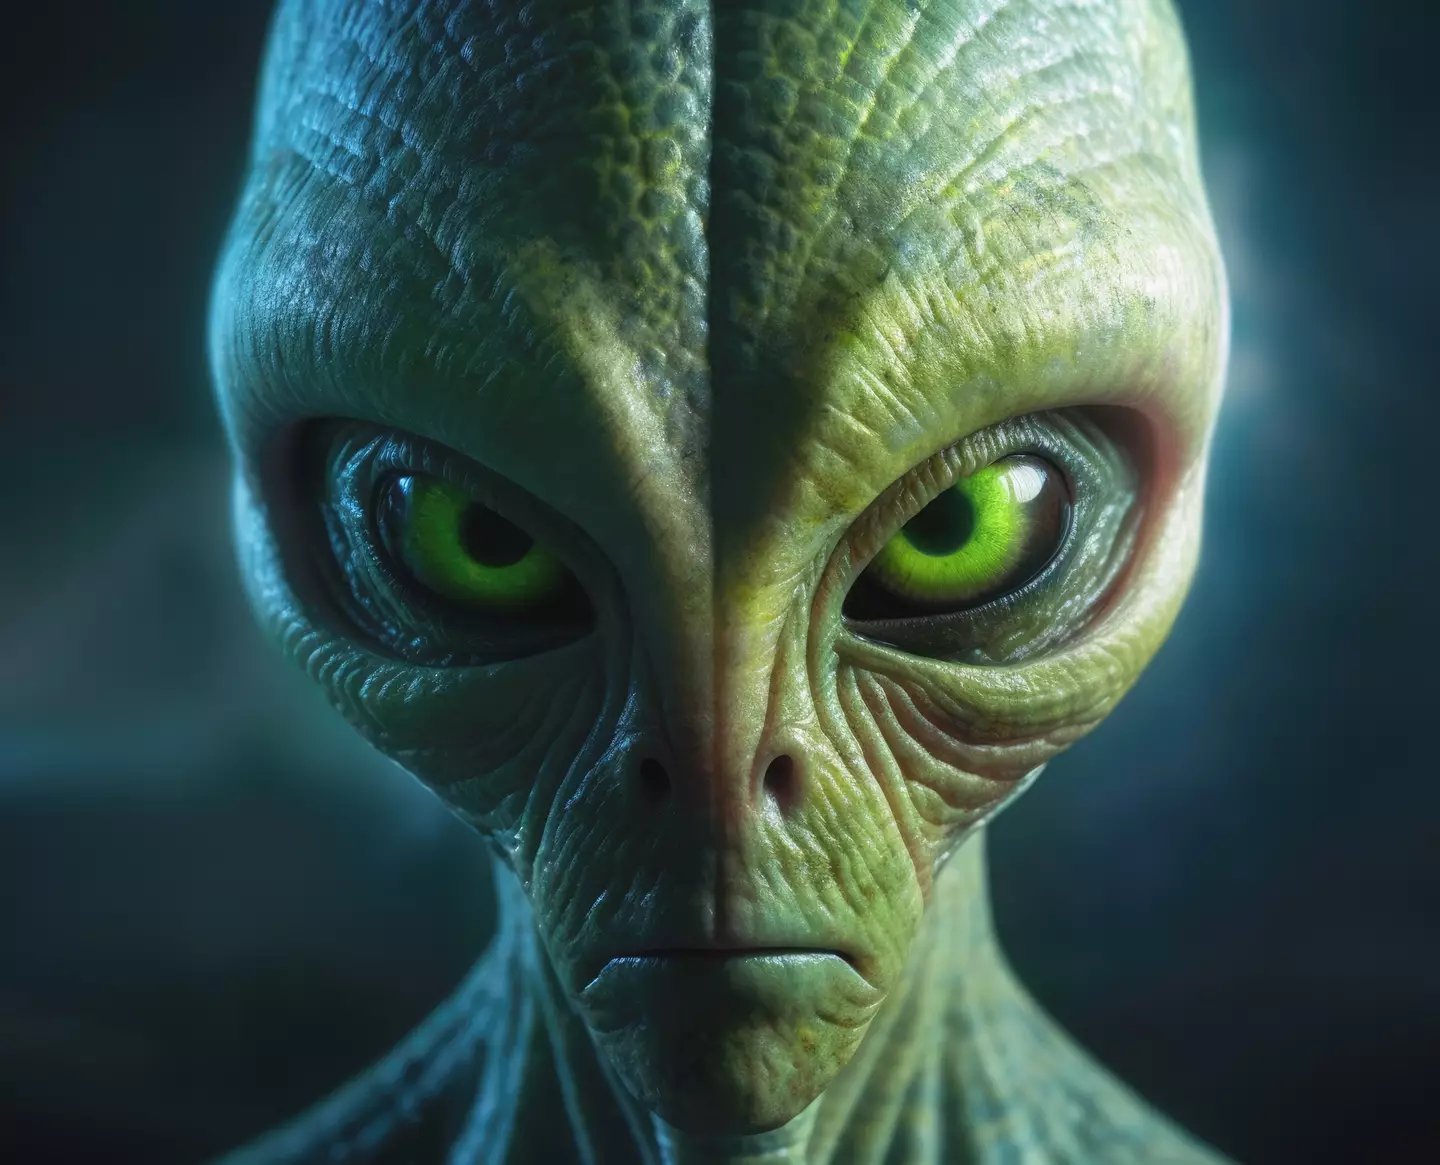 According to the report, aliens may have wiped themselves out. (Getty Stock Photo)